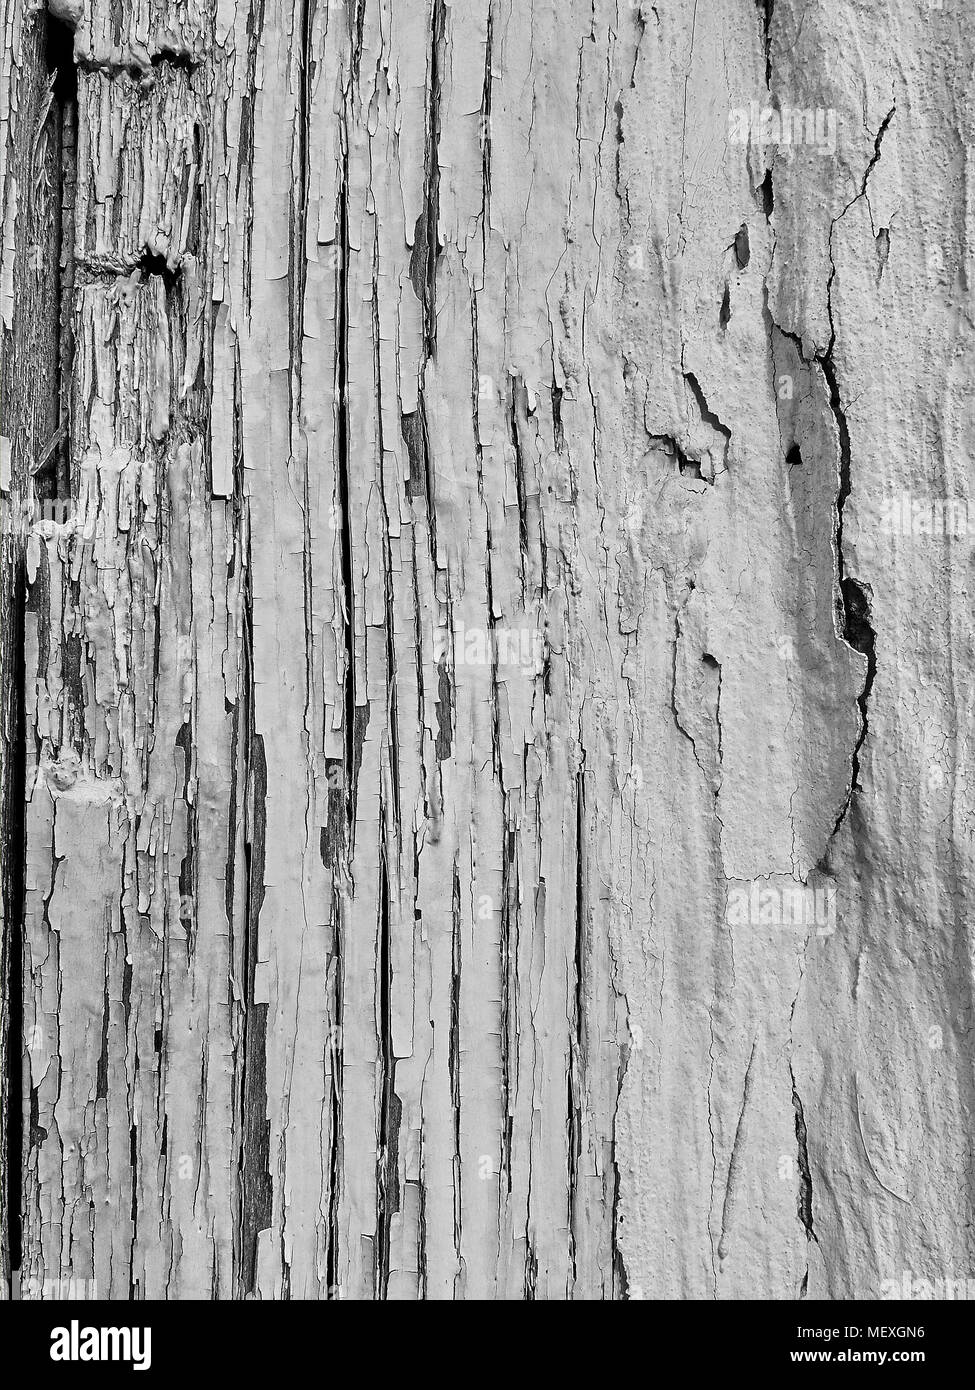 Worn white paint on wood background texture, Stock image